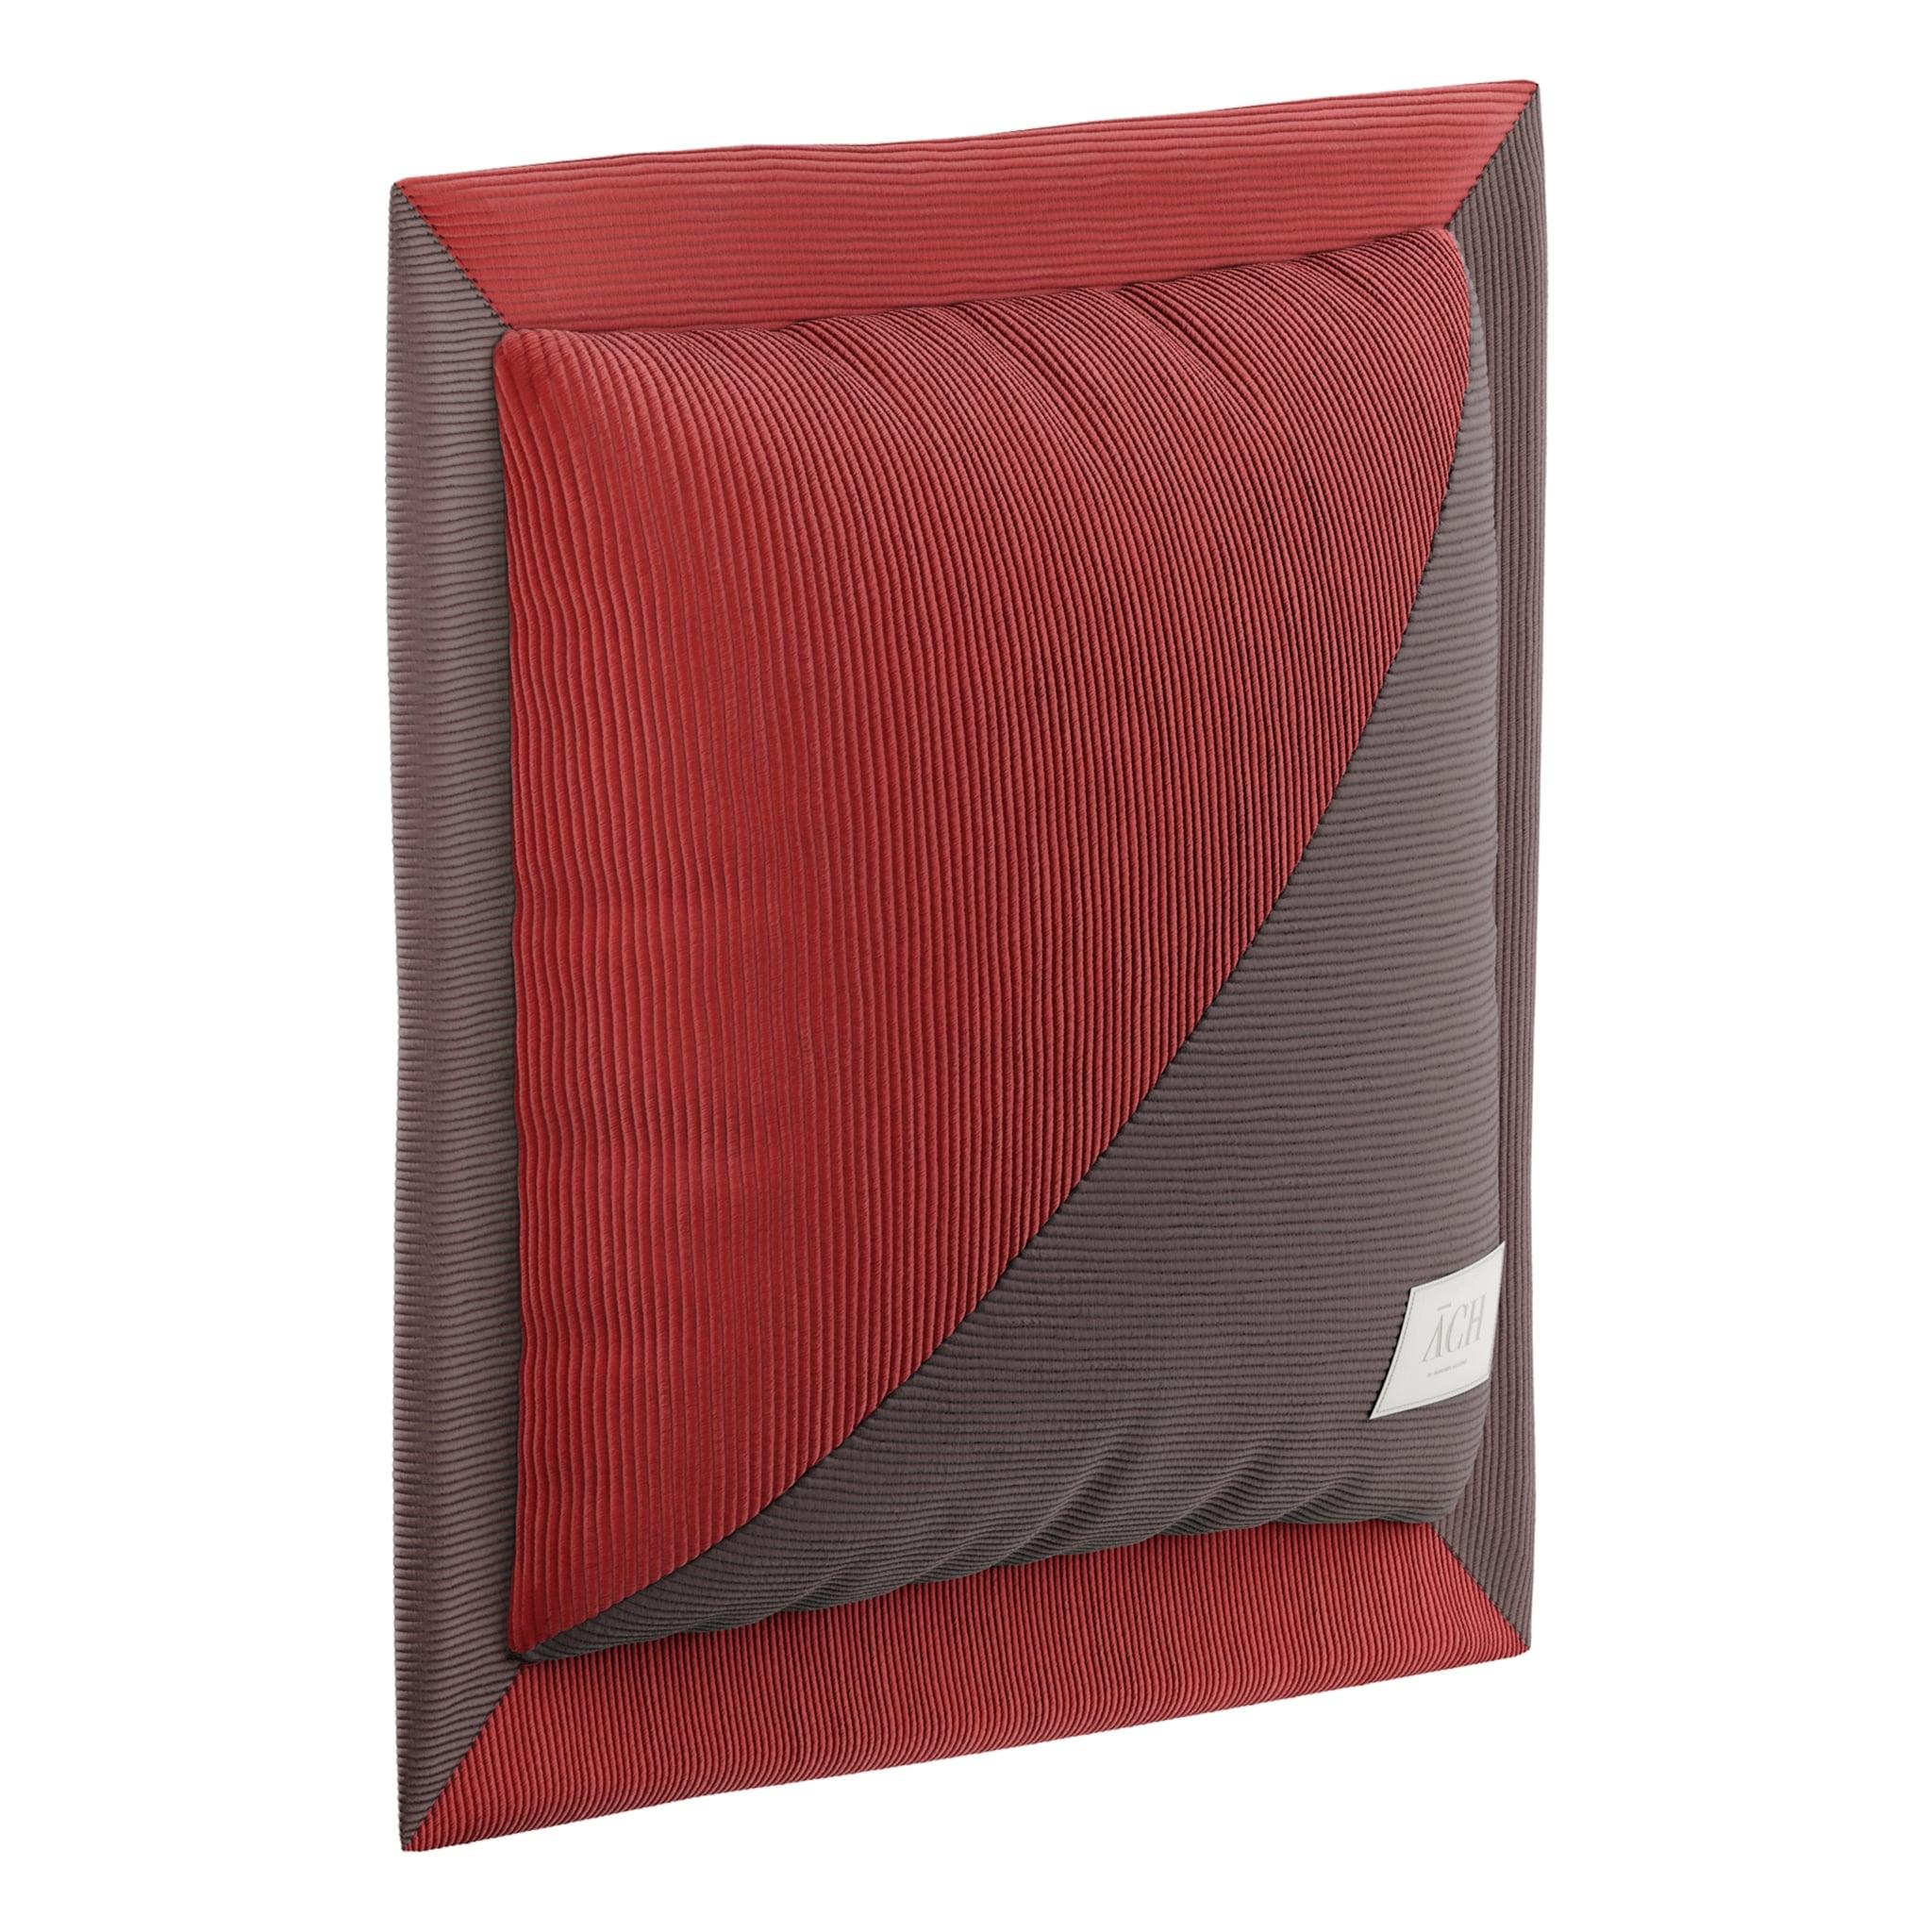 Red geometric patchwork throw pillow, luxury modern square corduroy cushion 23''
Red Ebony Square is a modern throw pillow with flange in juicy red corduroy and secretive ebony.
This decorative pillow is a must-have throw pillow with a haute